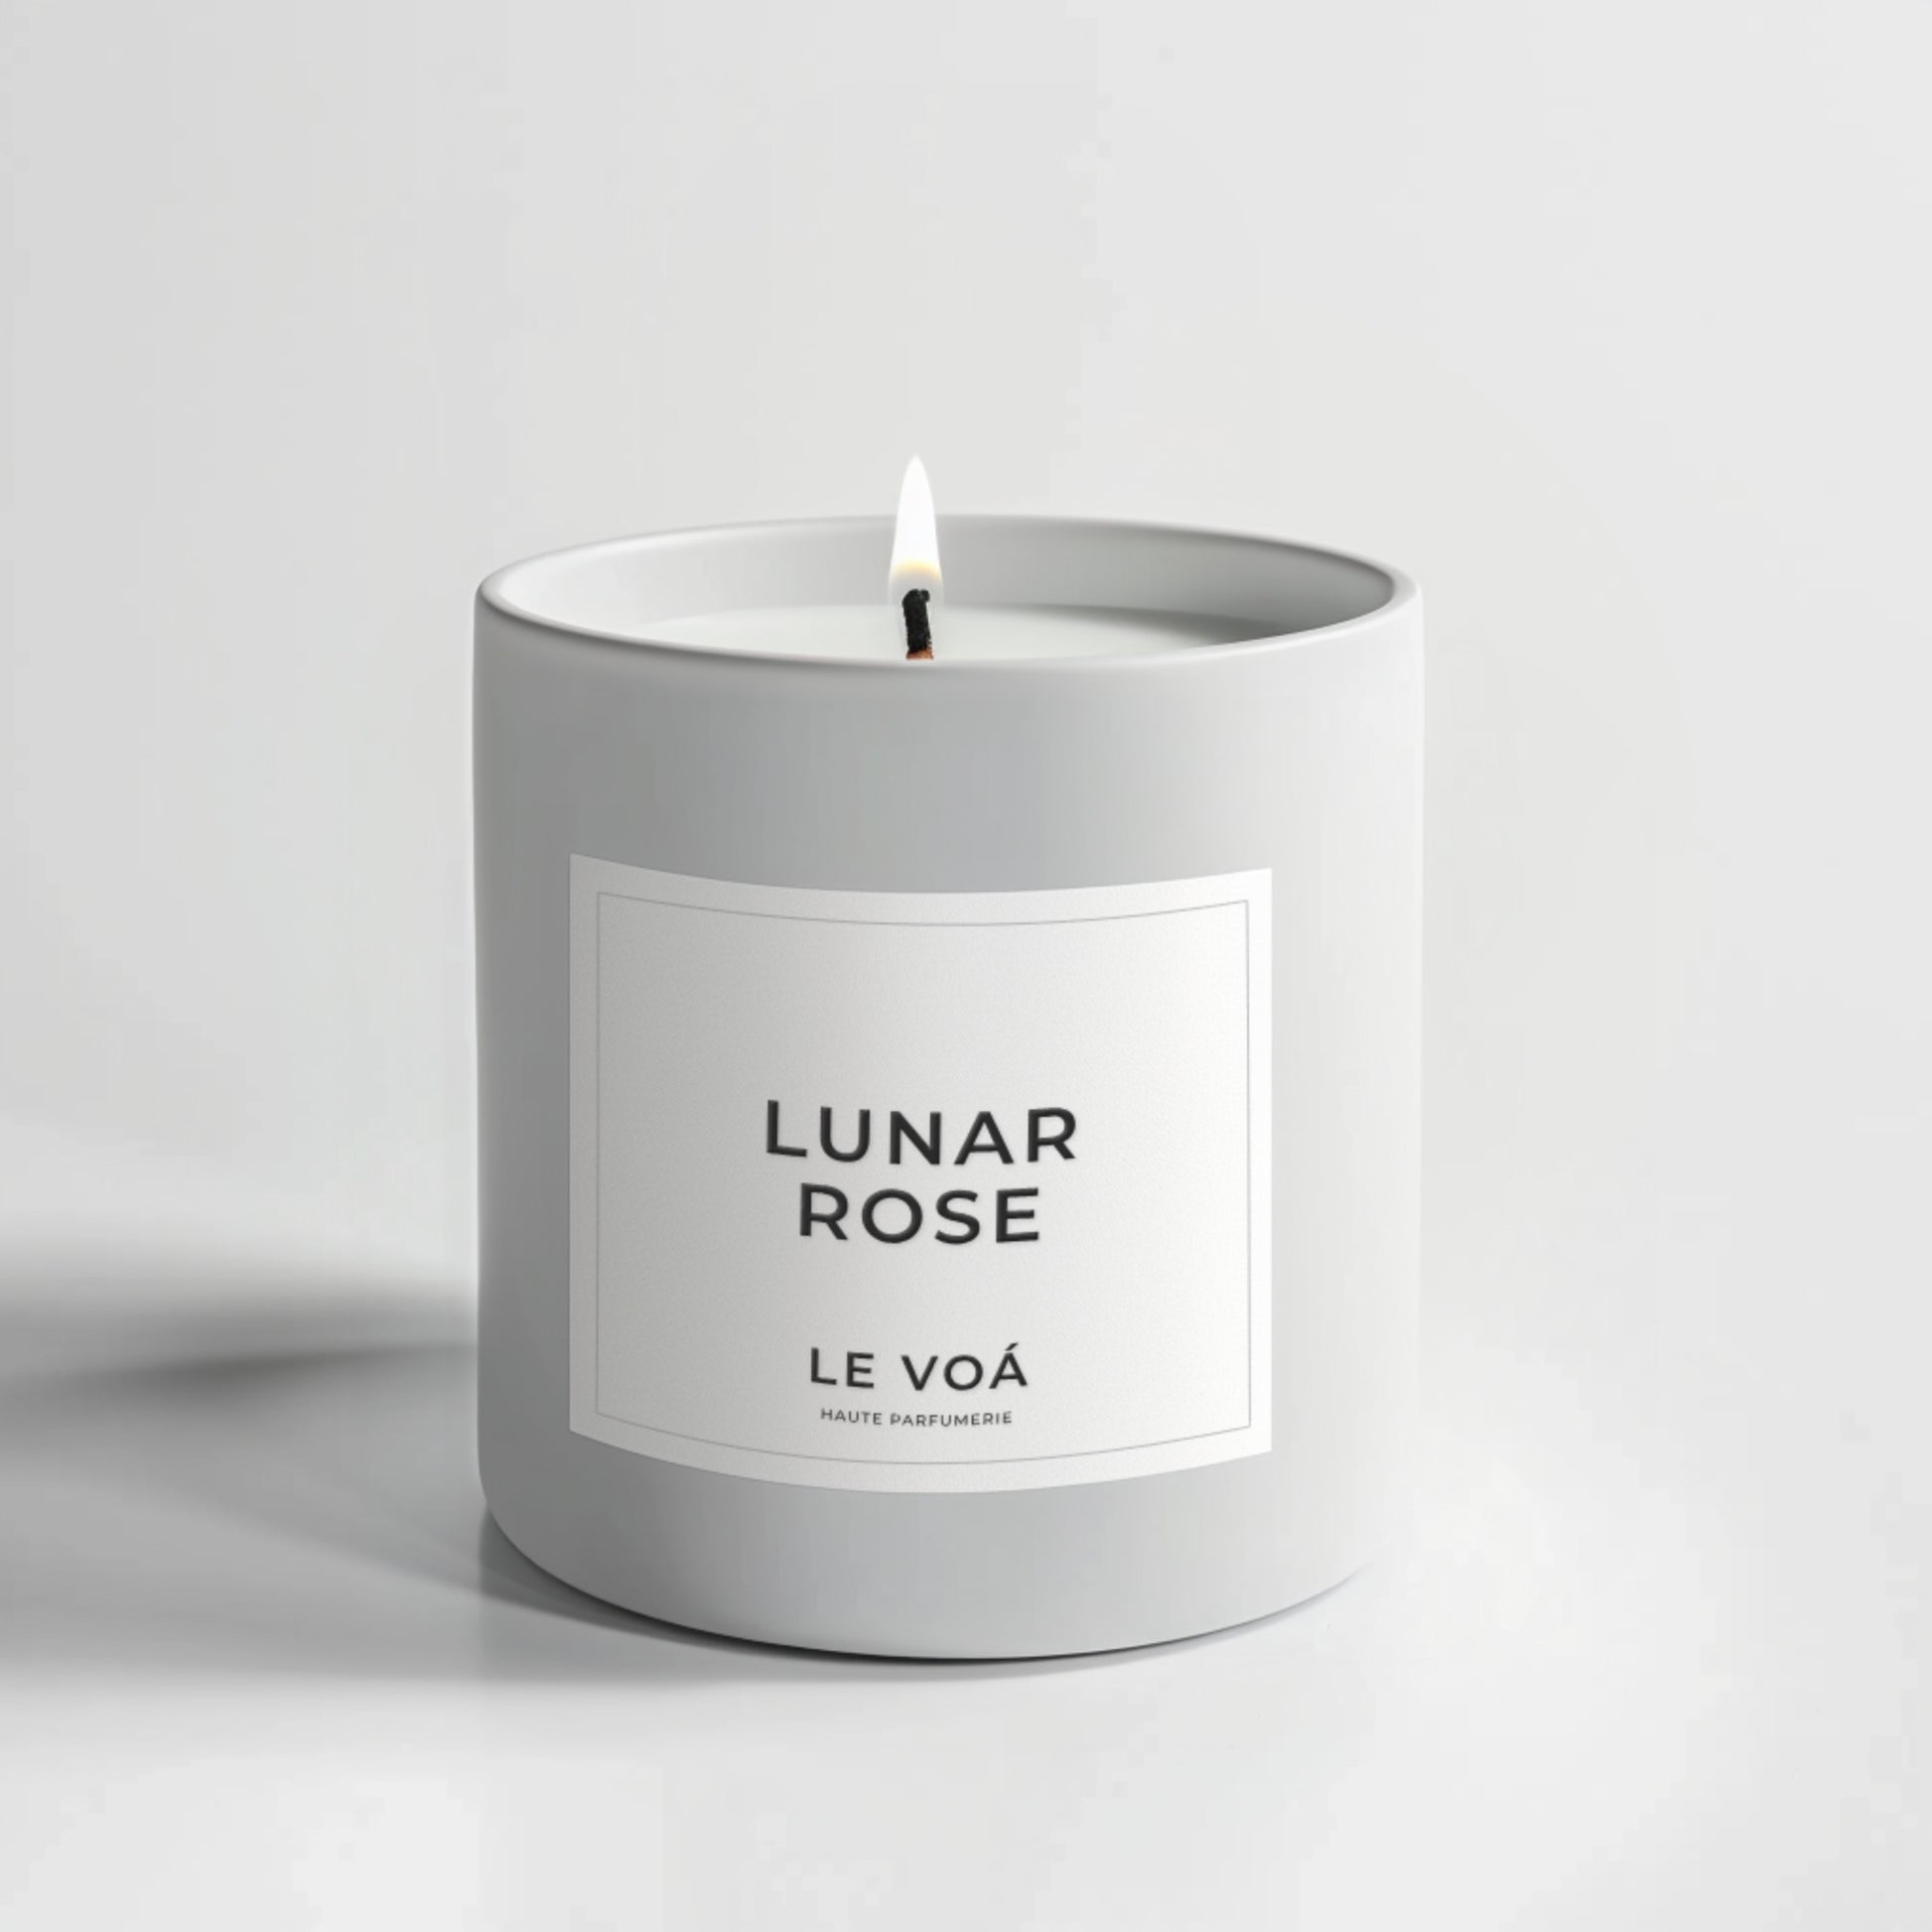 luxury scented candle lit